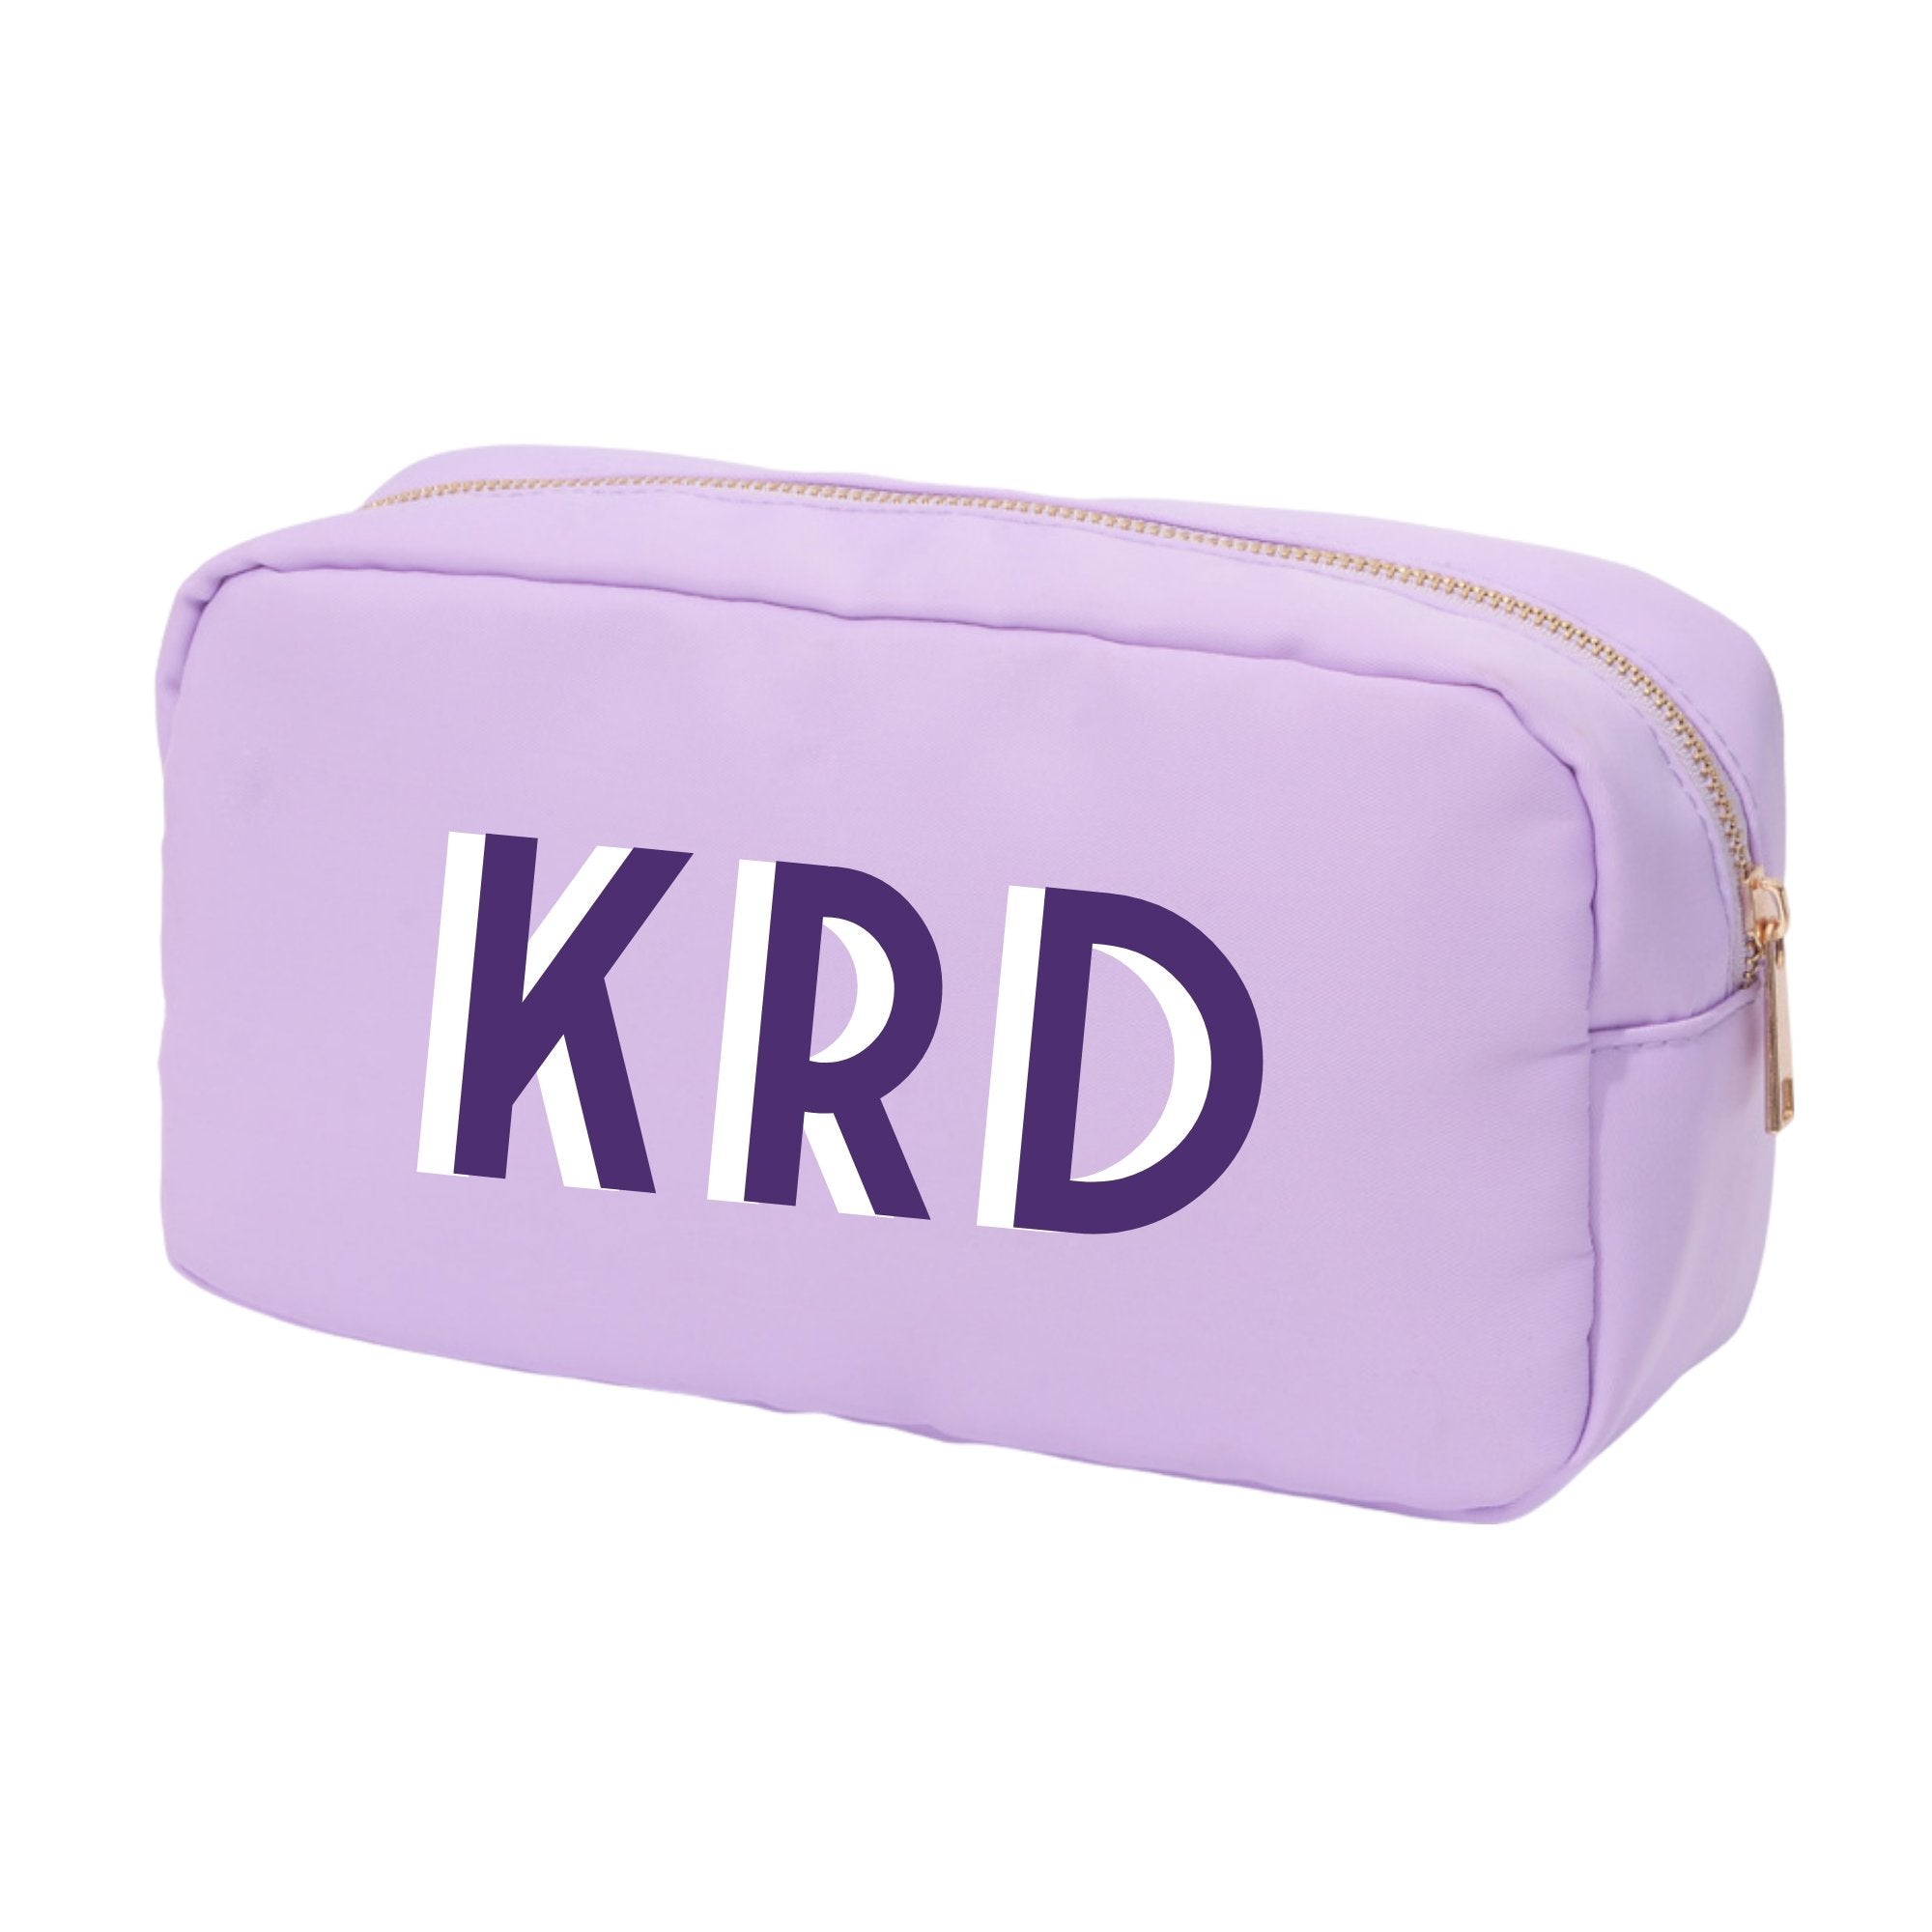 A group of a large nylon pouches are customized with monograms 